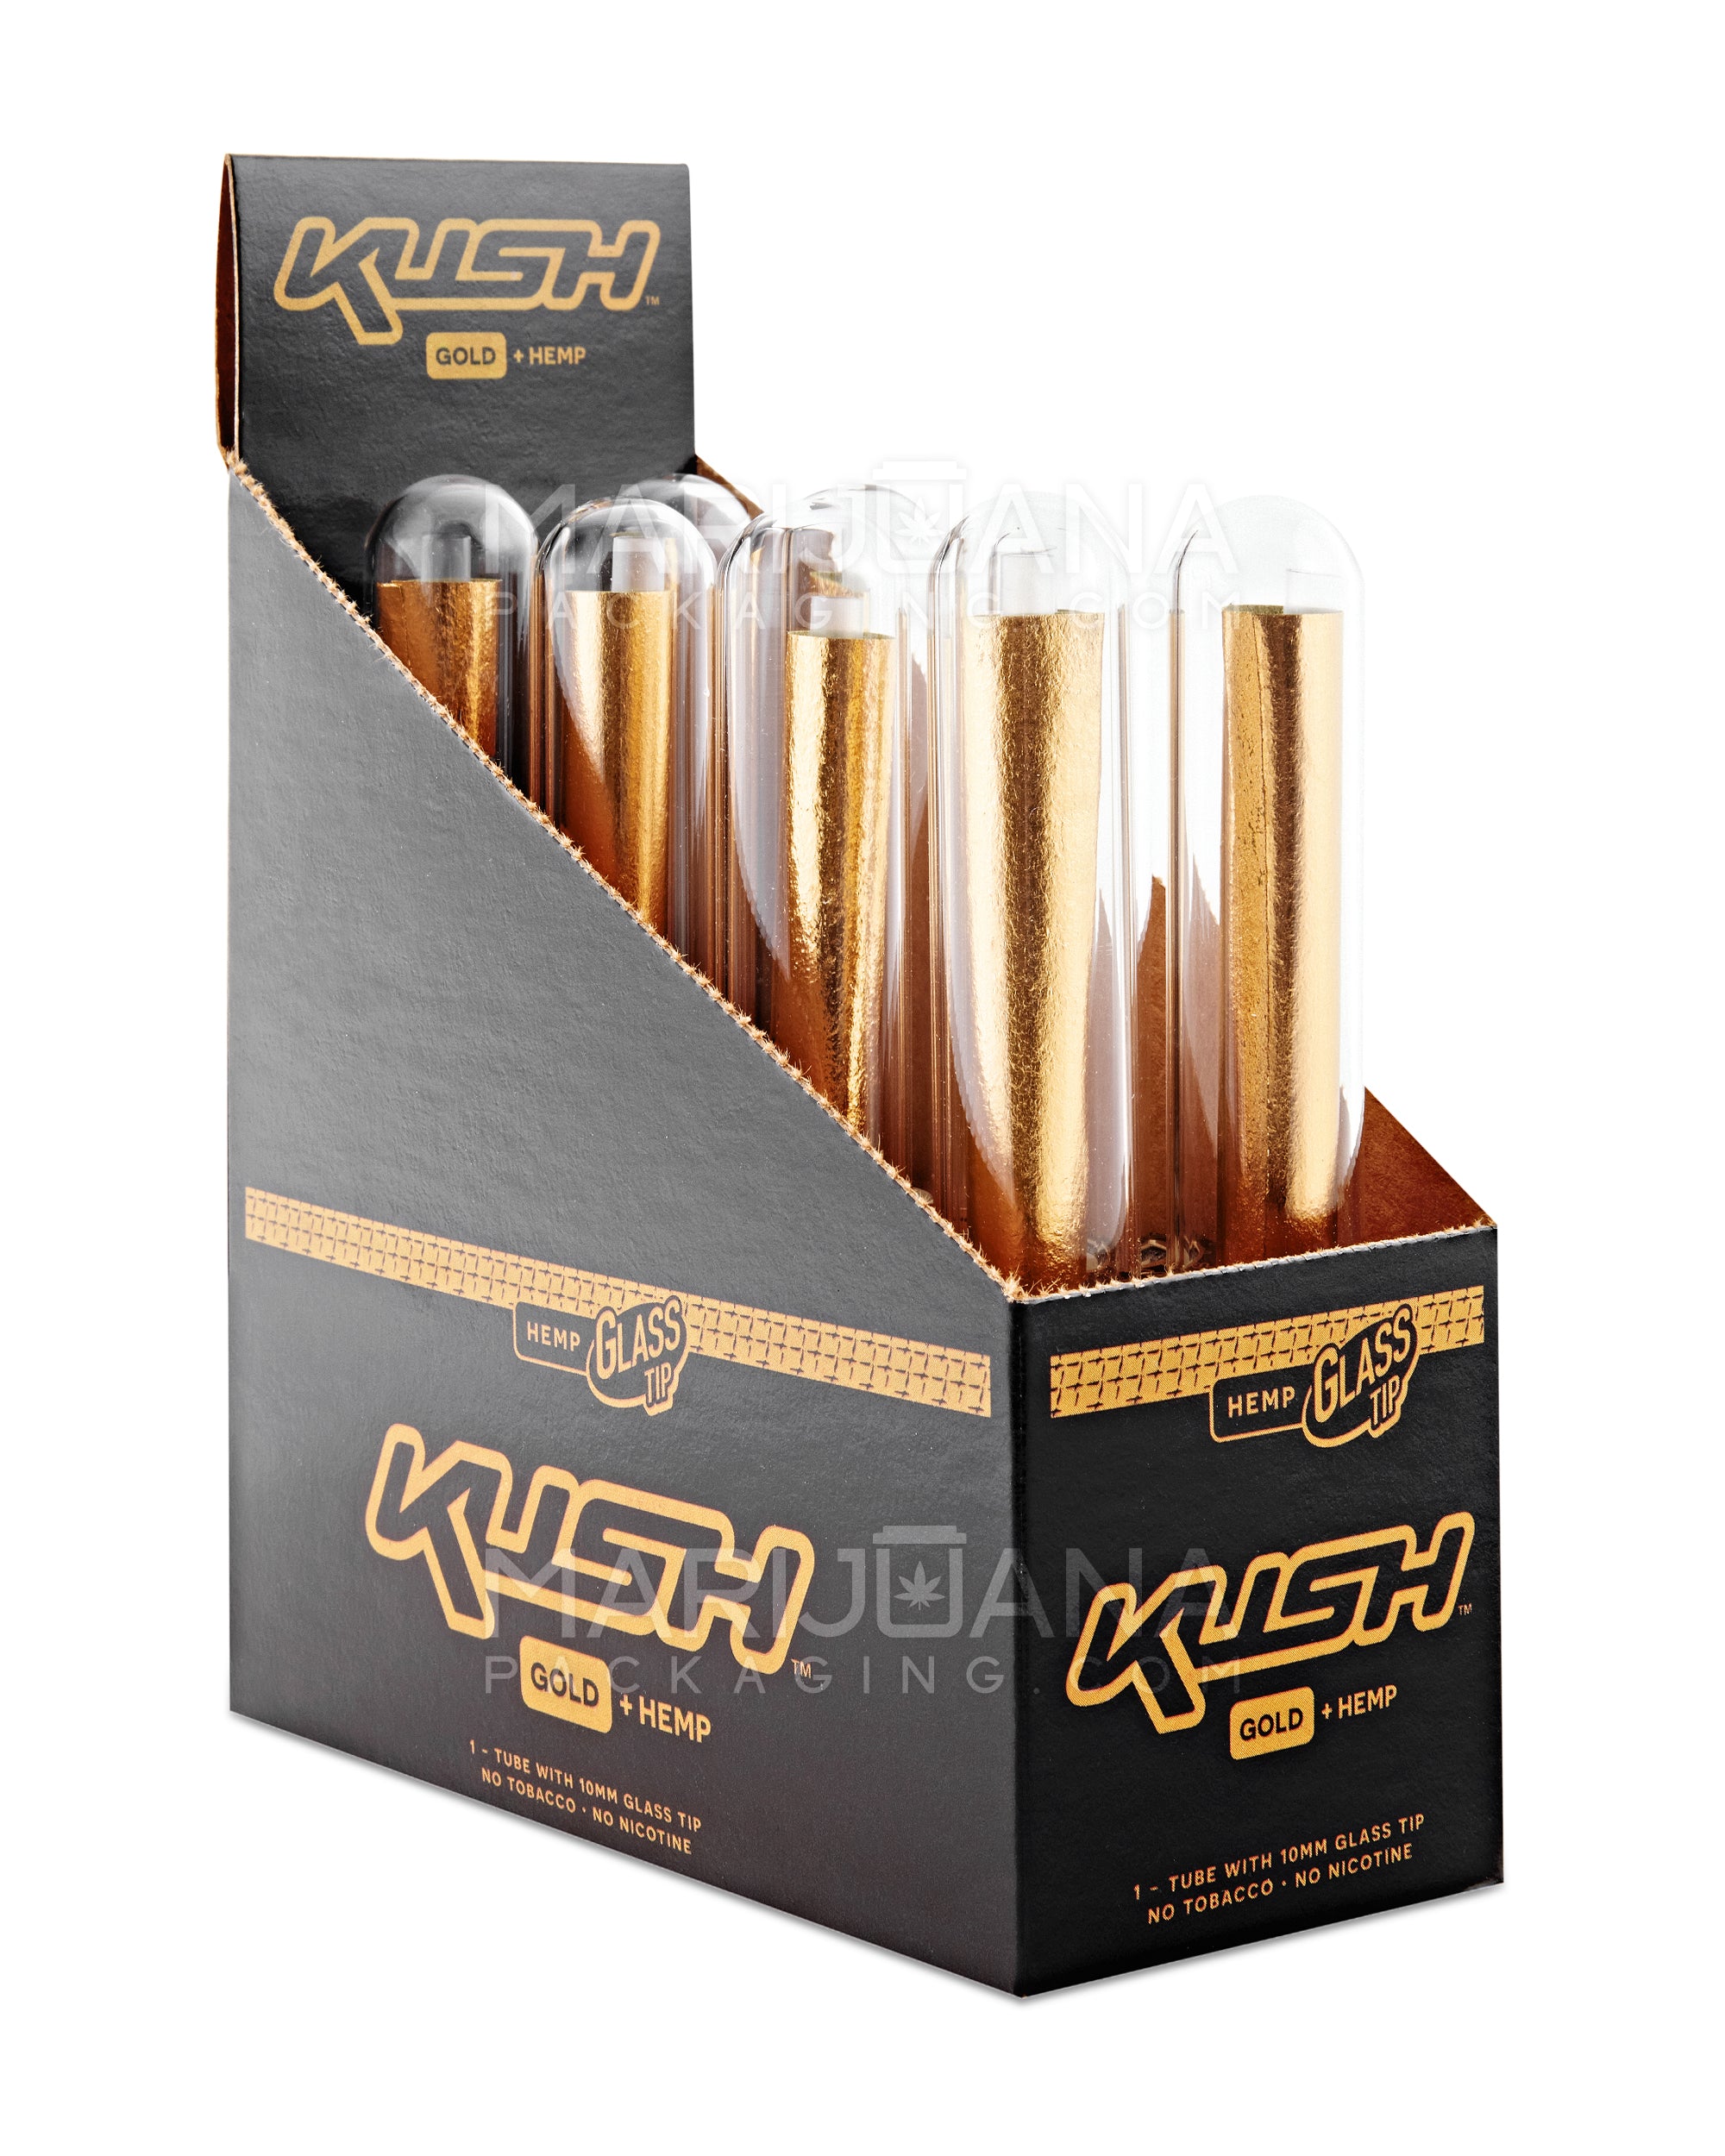 KUSH | 'Retail Display' 24K Gold King Size Hemp Pre Rolled Cones w/ Glass Filter Tips | 109mm - Edible Gold - 8 Count